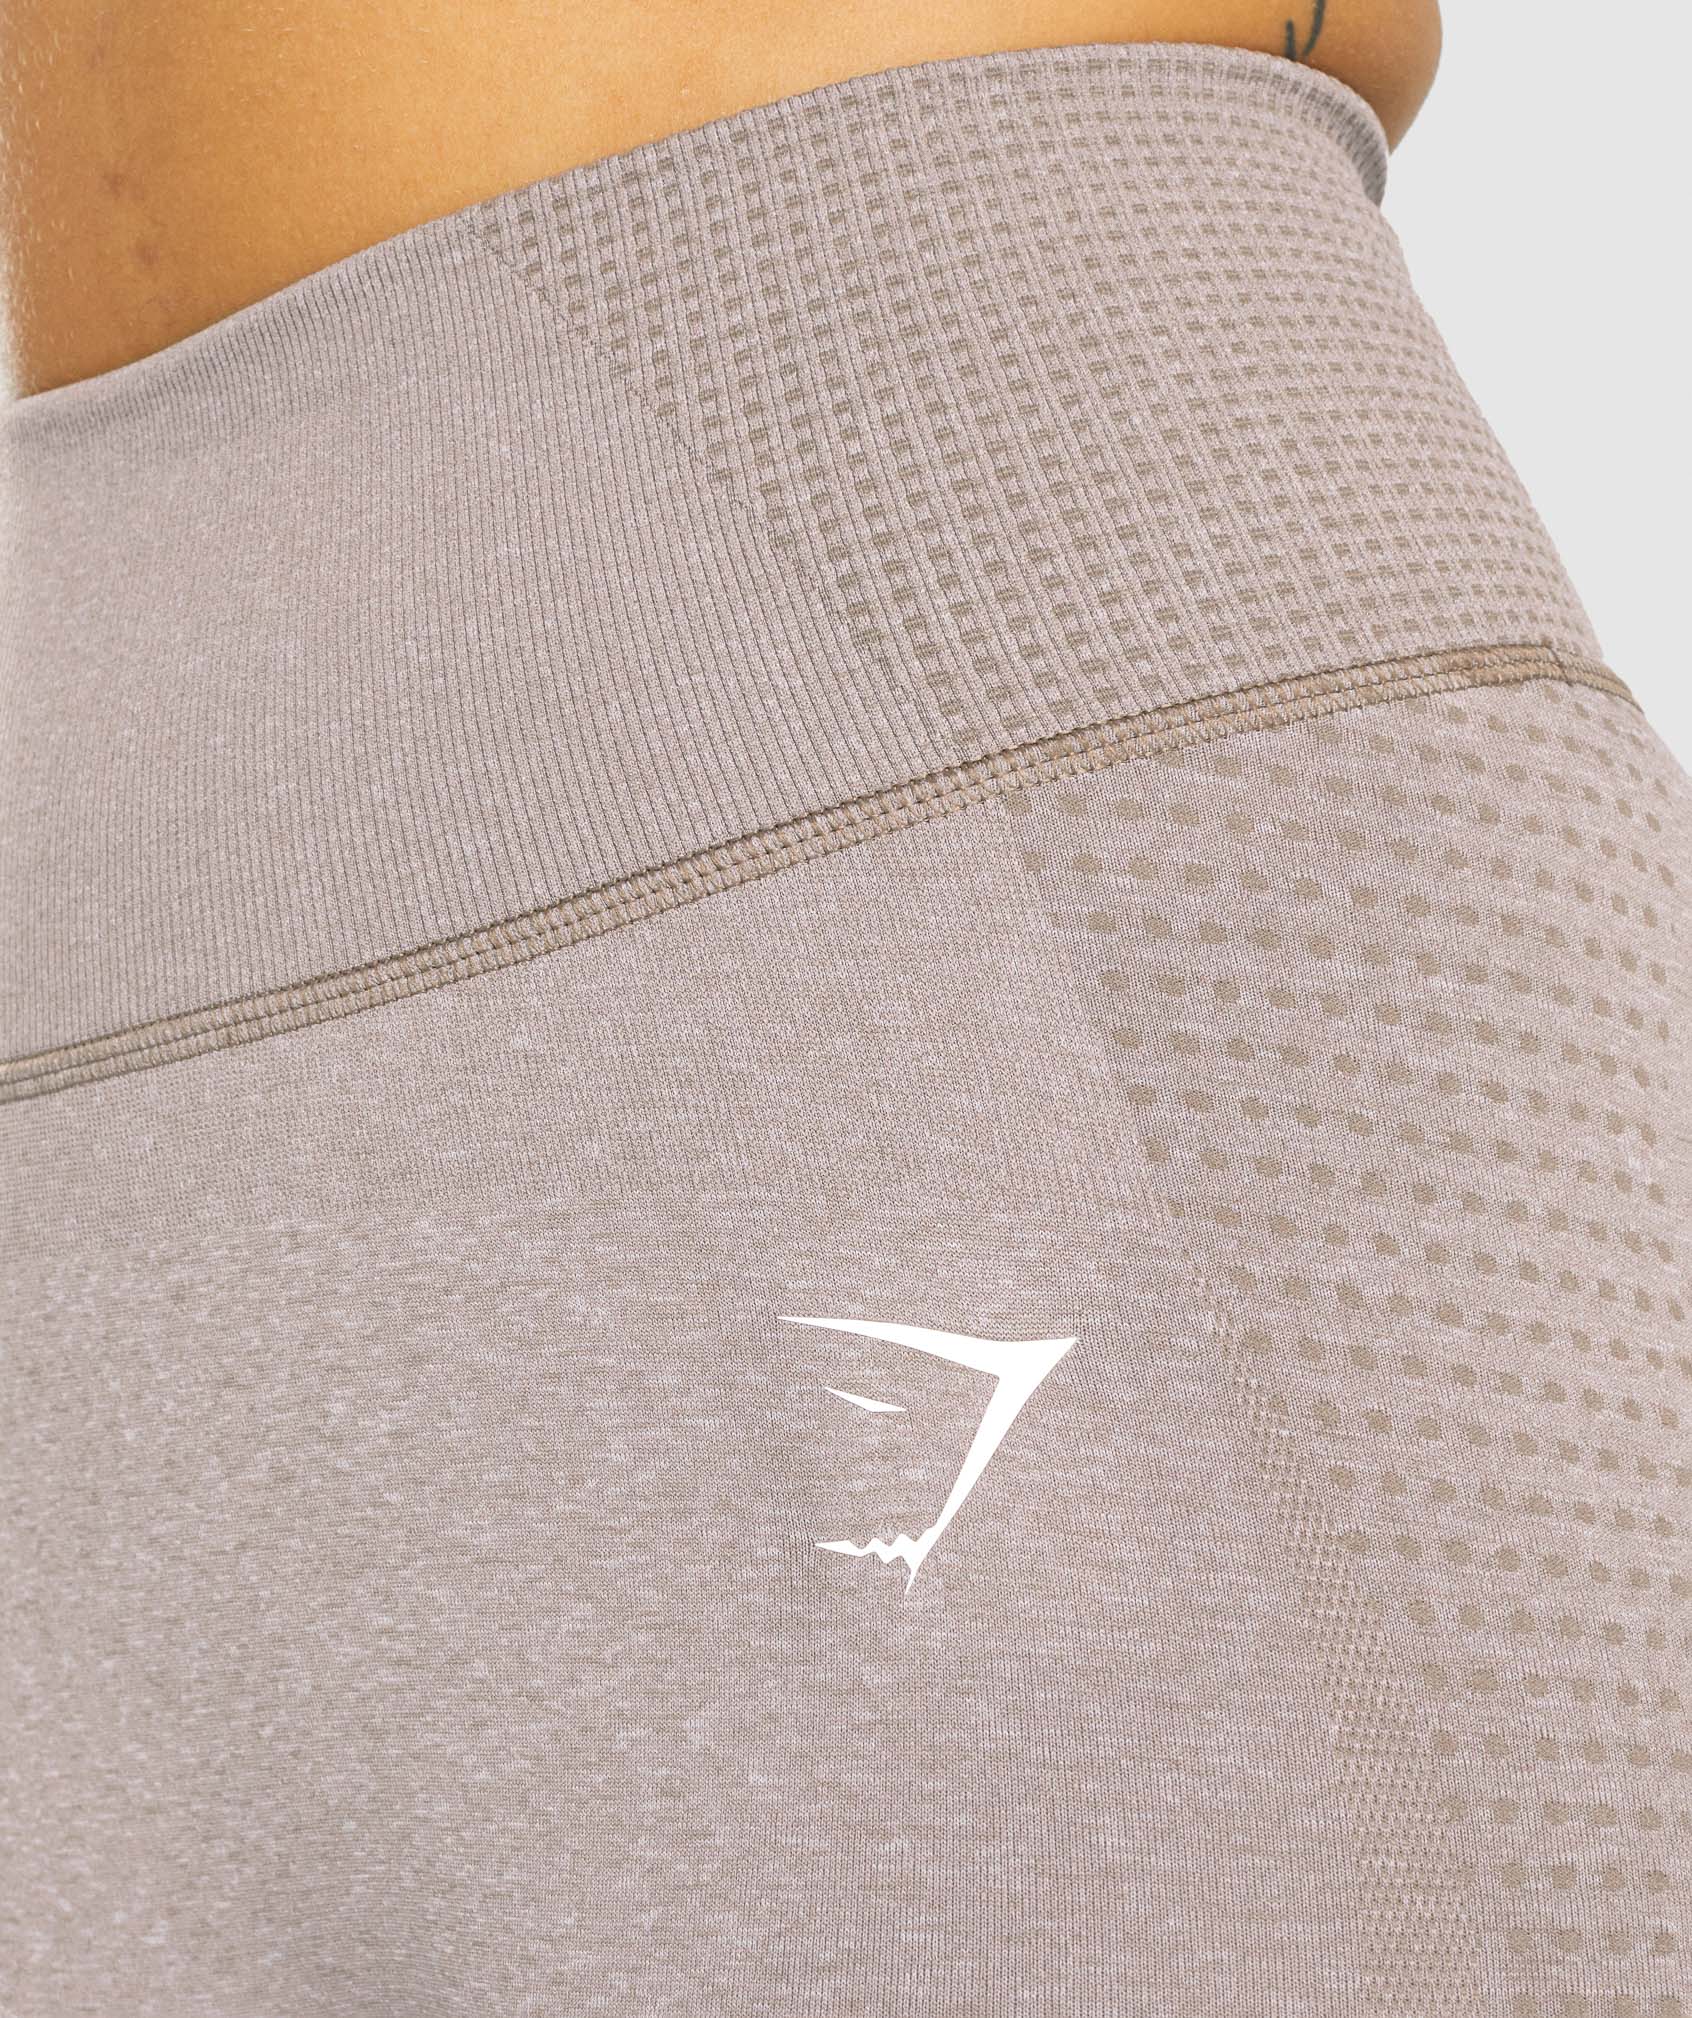 Womens Gymshark Dreamy Leggings Taupe Size Large